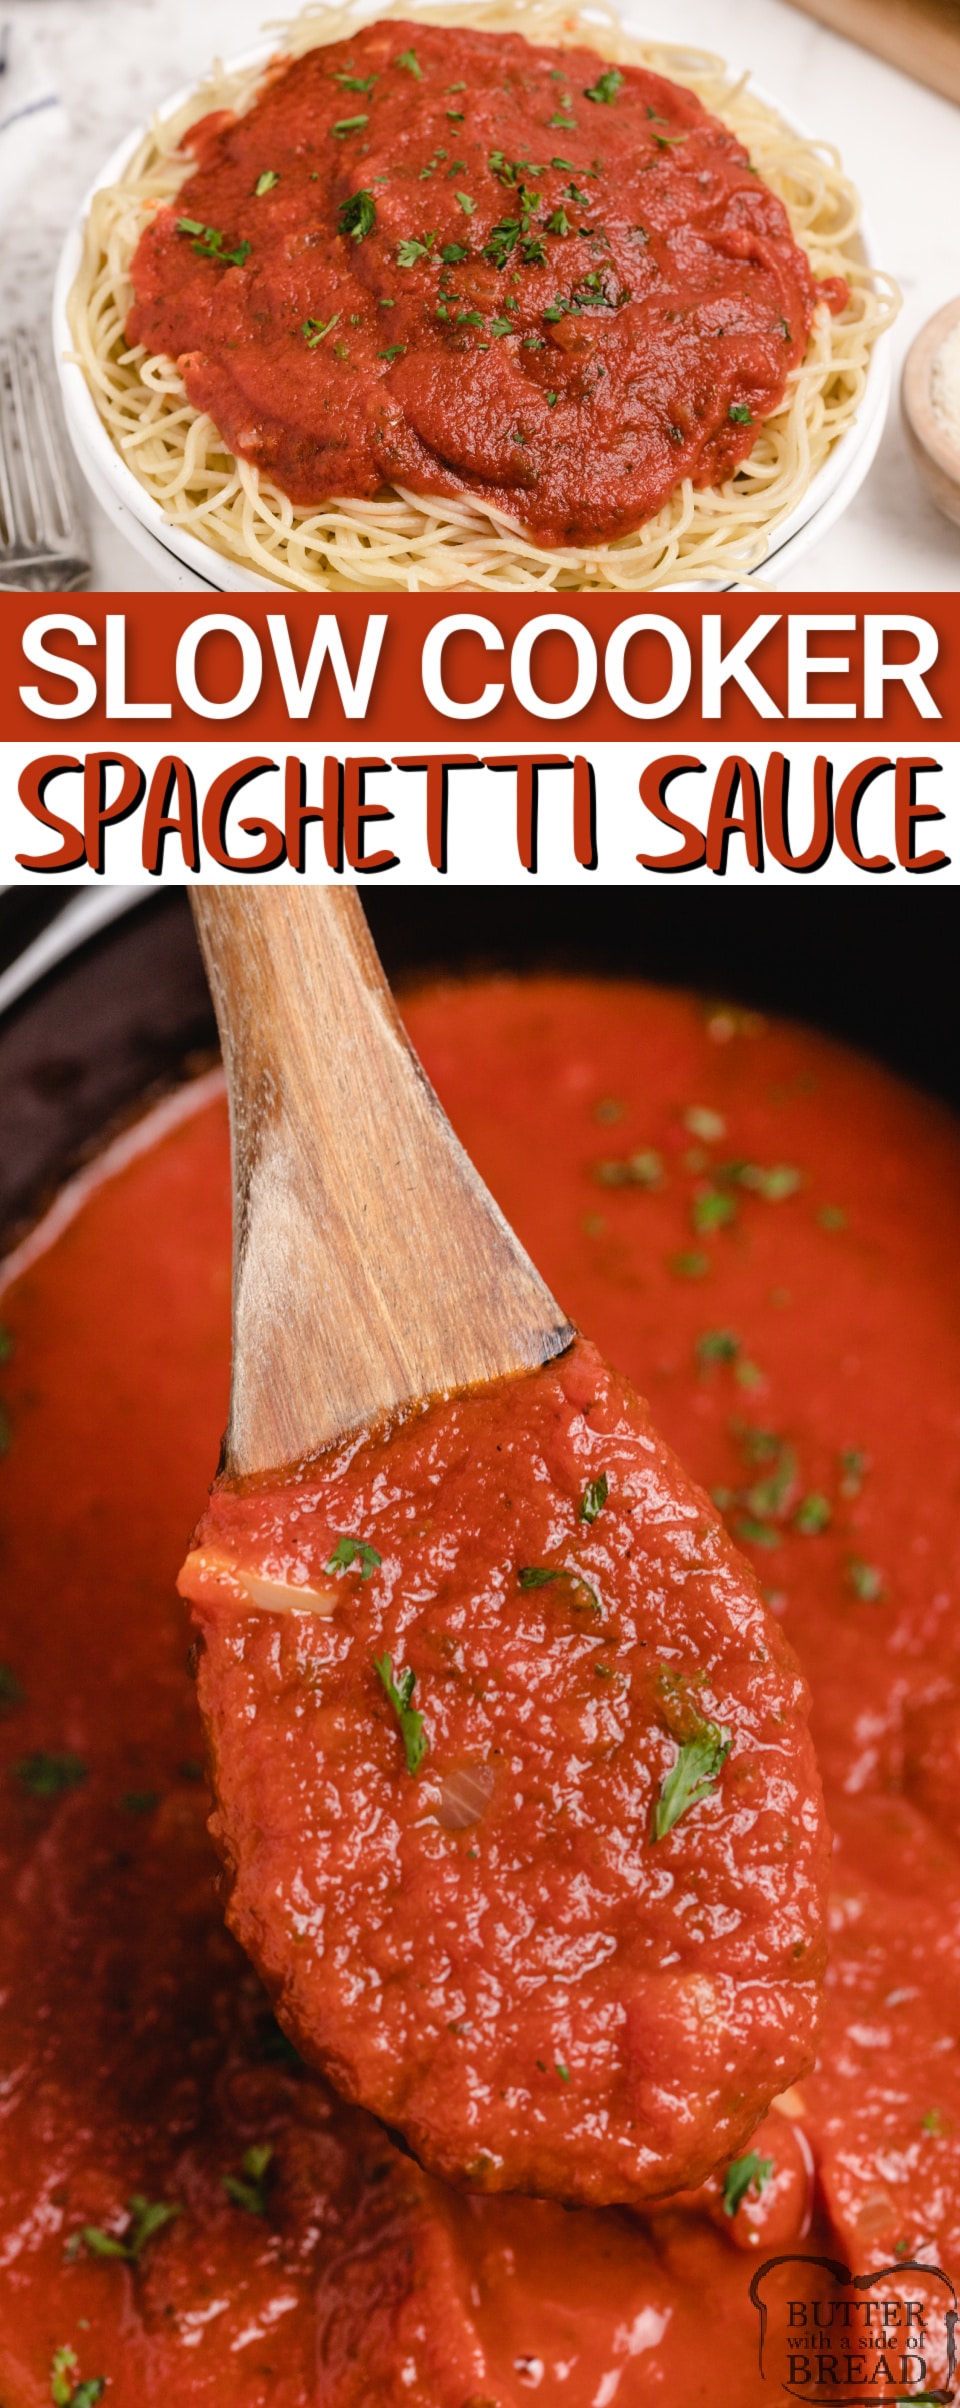 Crockpot Spaghetti Sauce made with a delicious blend of spices and tomatoes. Best homemade spaghetti sauce recipe that is simmered for hours in a slow cooker to achieve the perfect flavor.